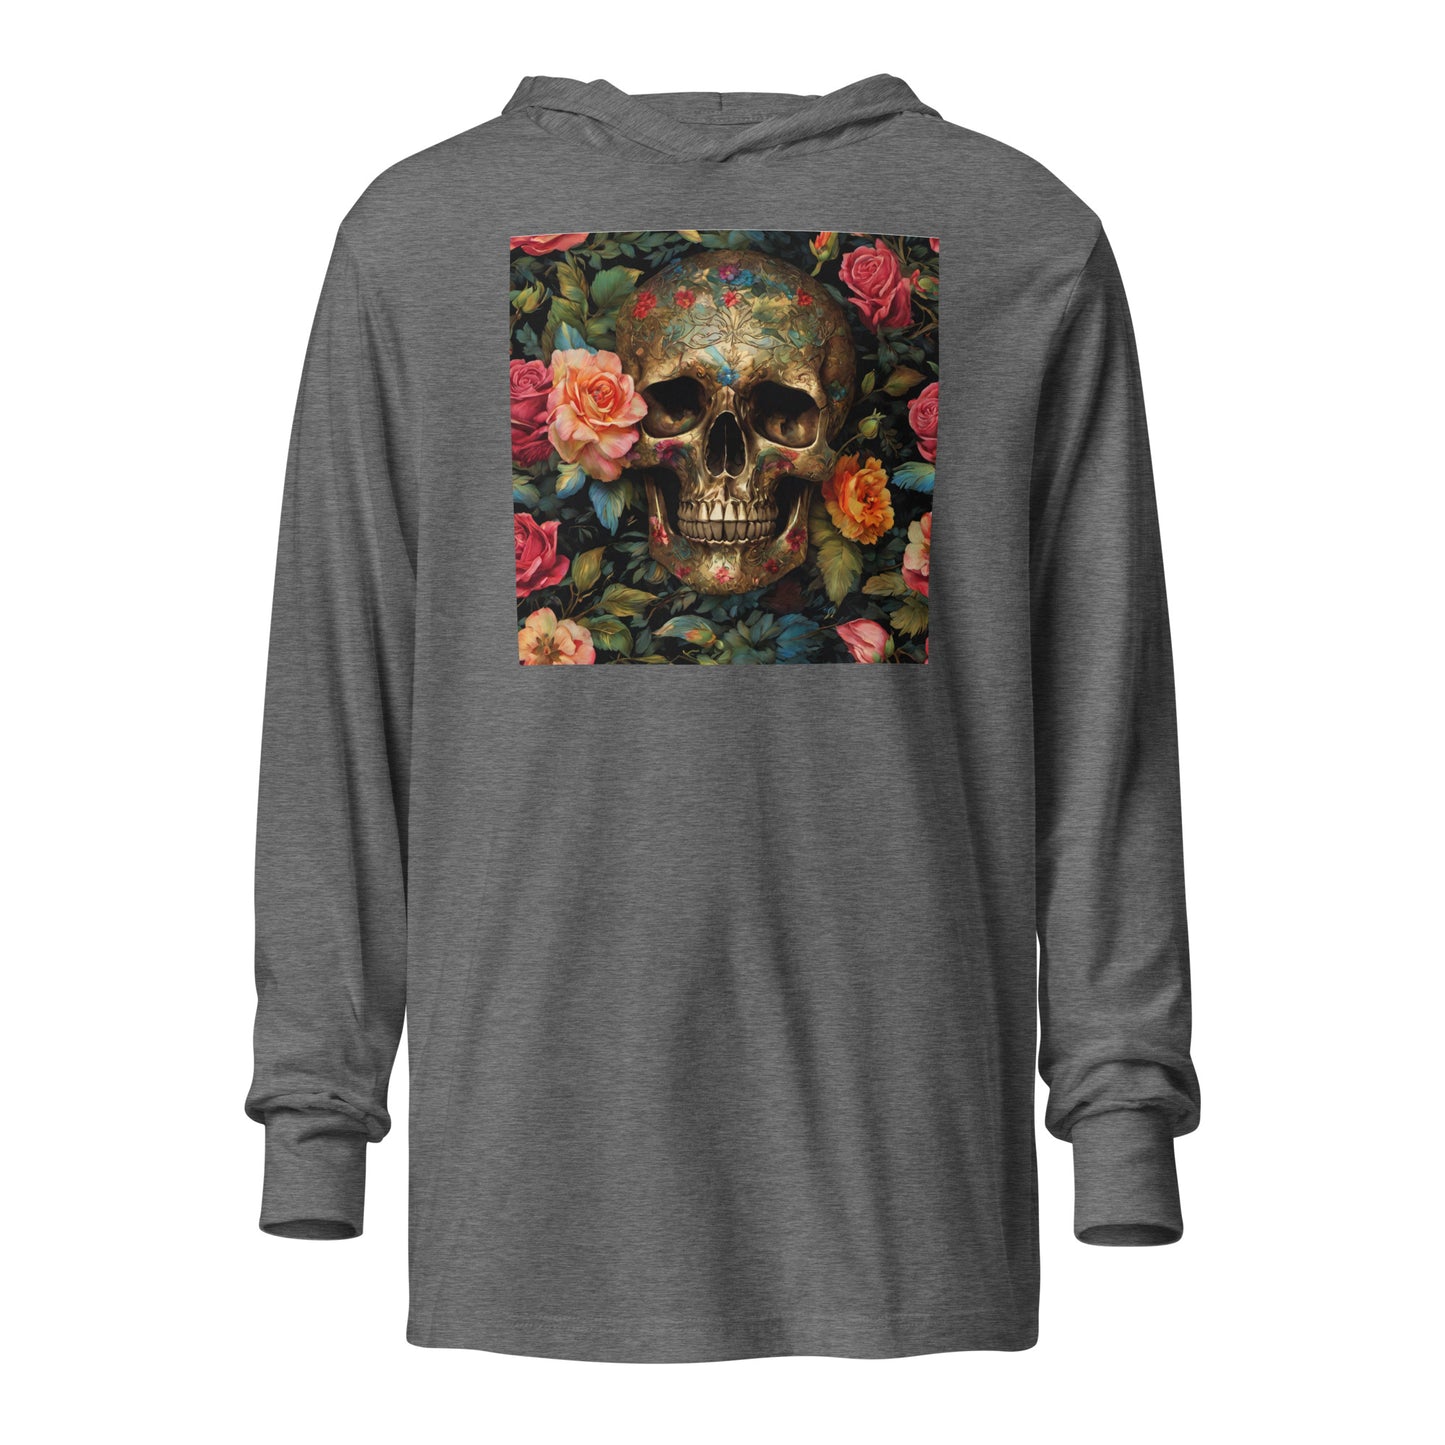 Skull and Roses Graphic Hooded Long-Sleeve Tee Grey Triblend